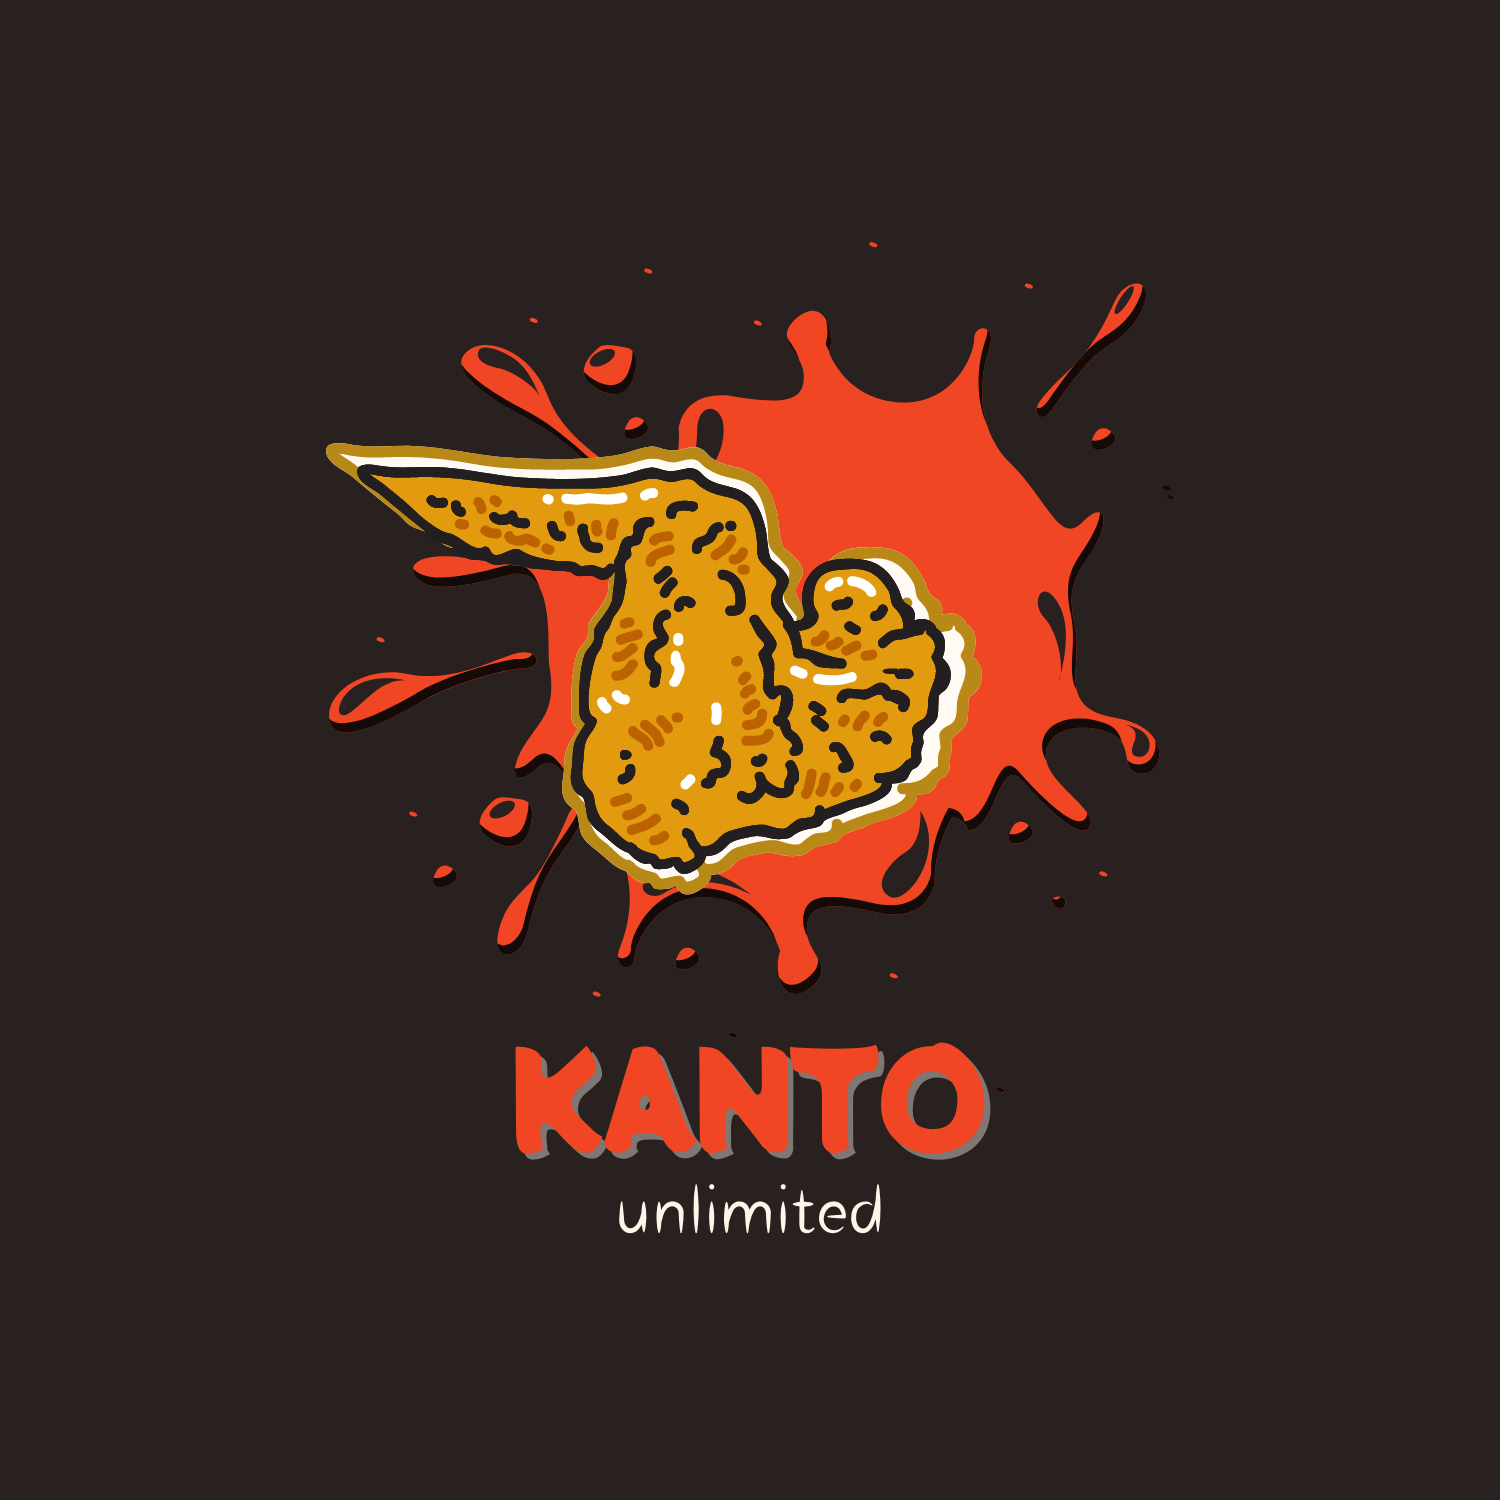 Everyday is Wing Day at Kanto